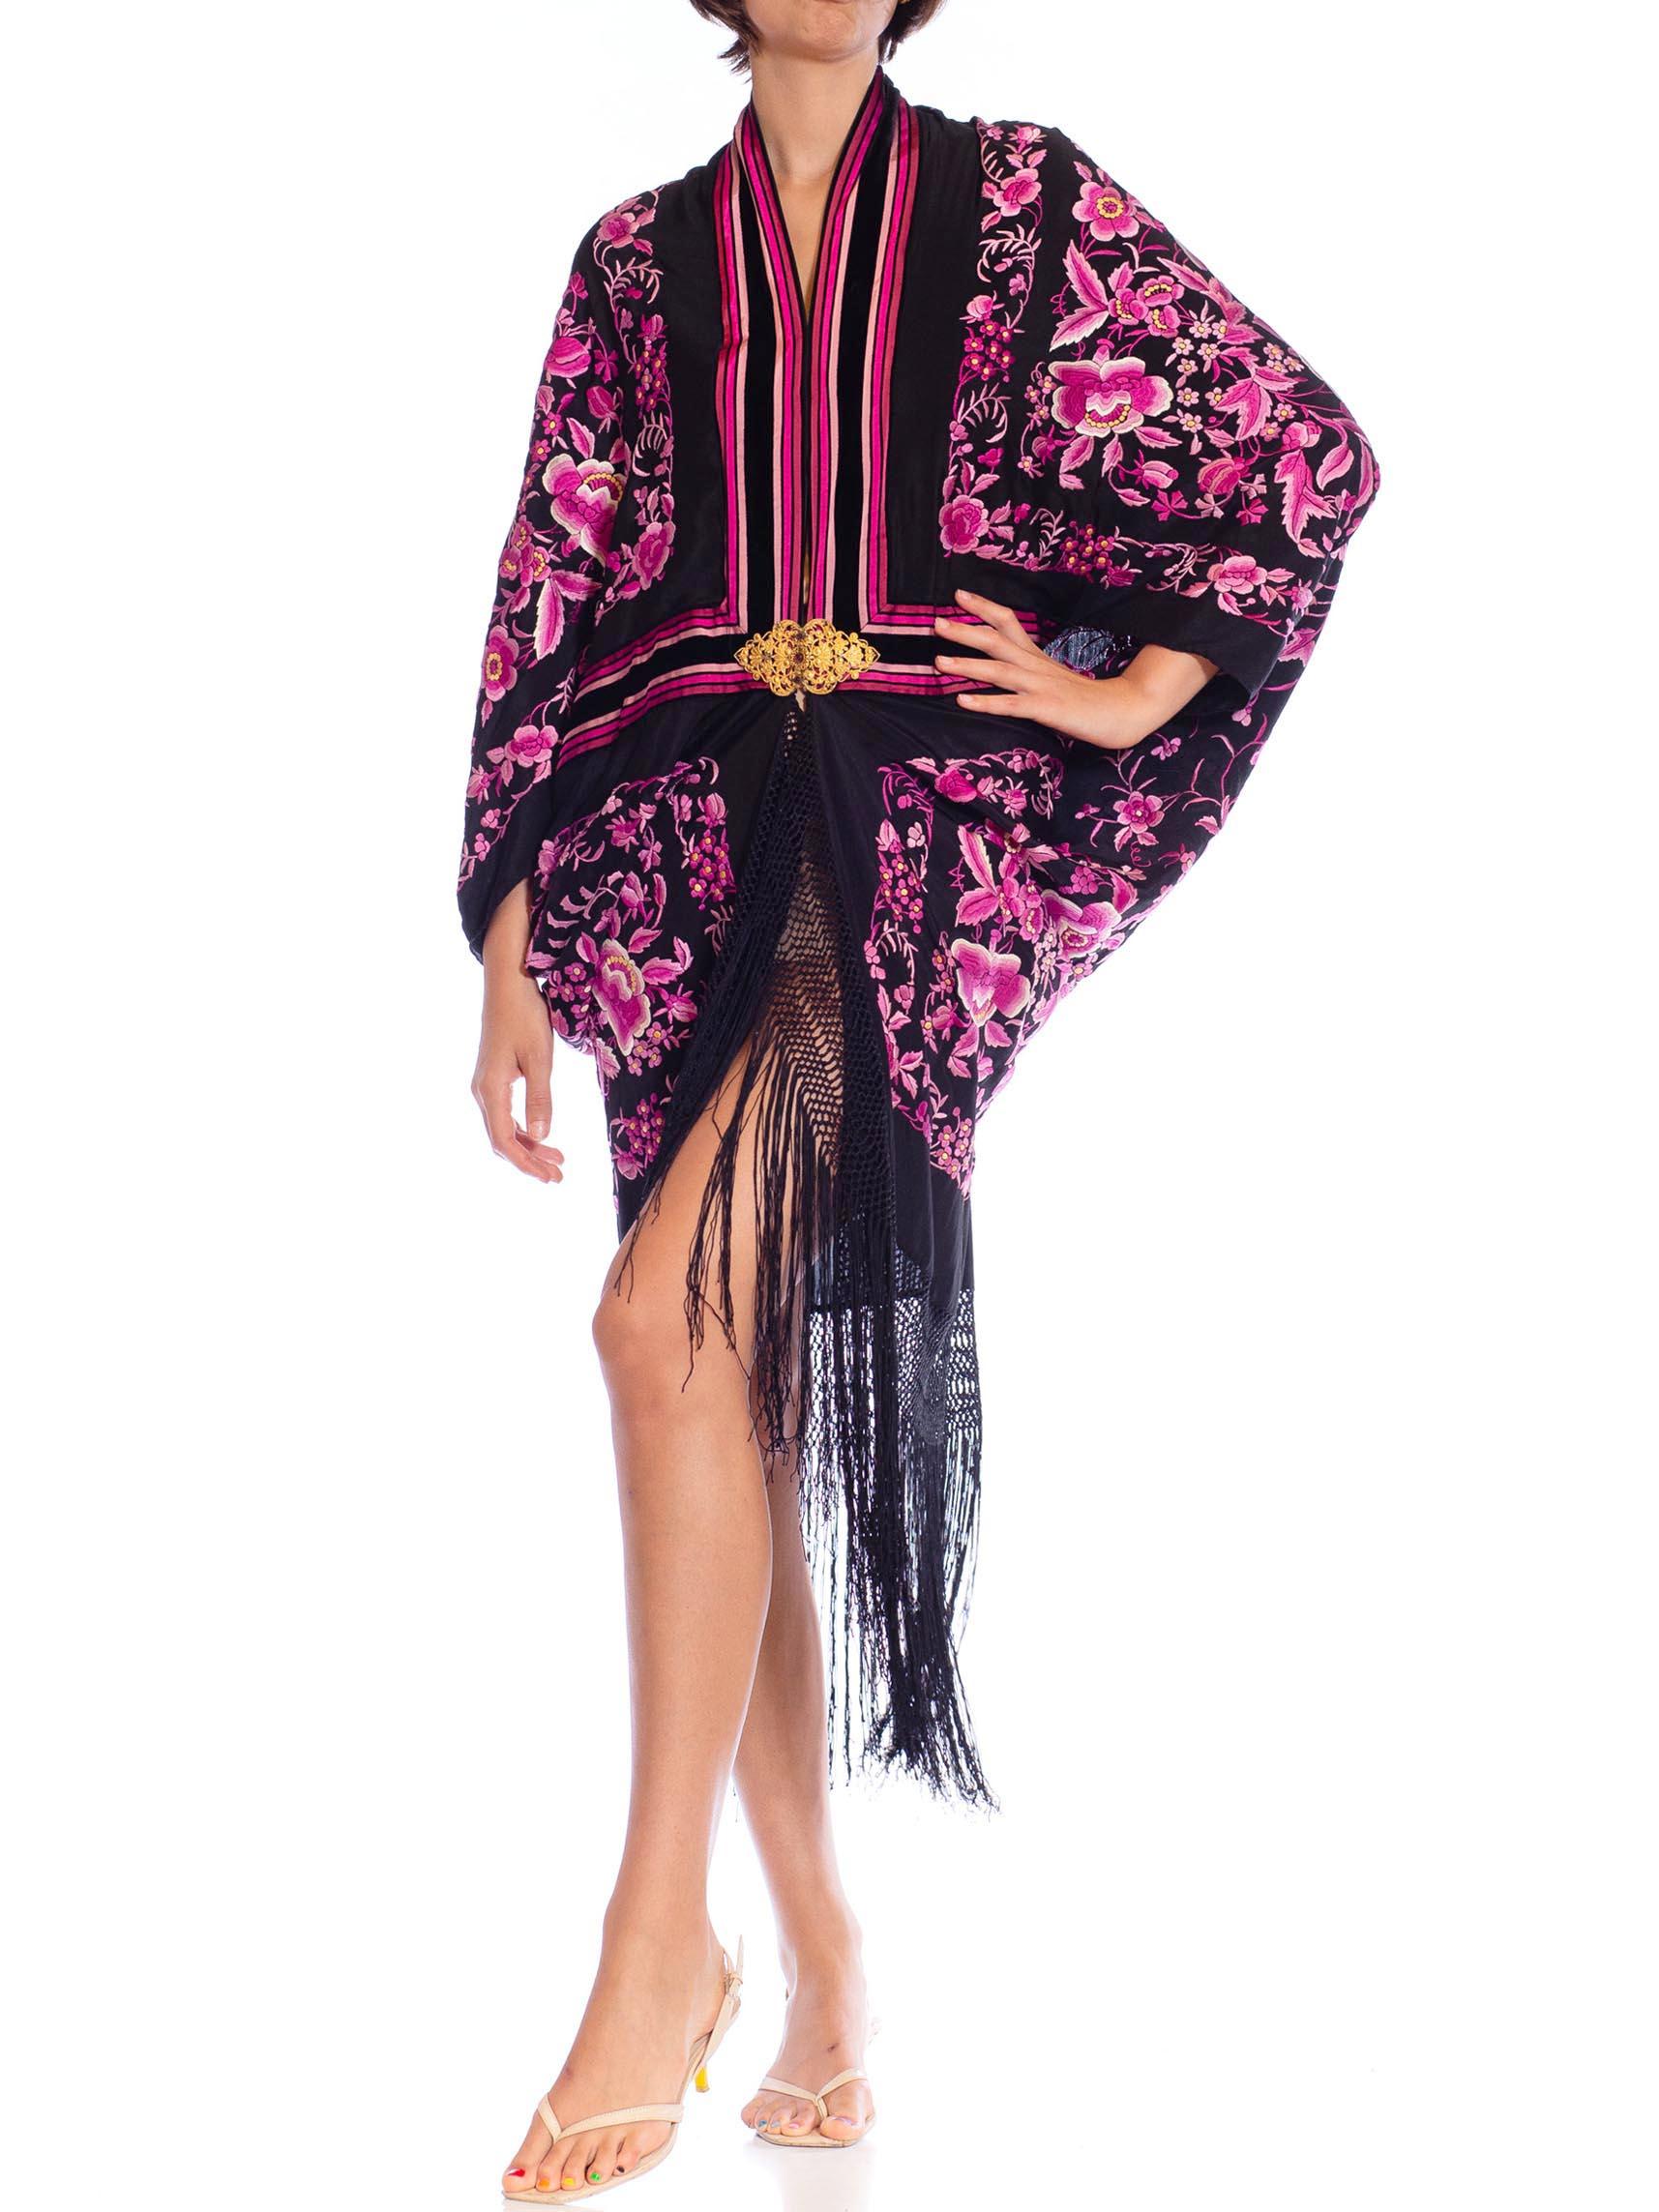 MORPHEW COLLECTION Lilac & Black Silk Embroidered Floral Cocoon With Fringe Gol For Sale 3